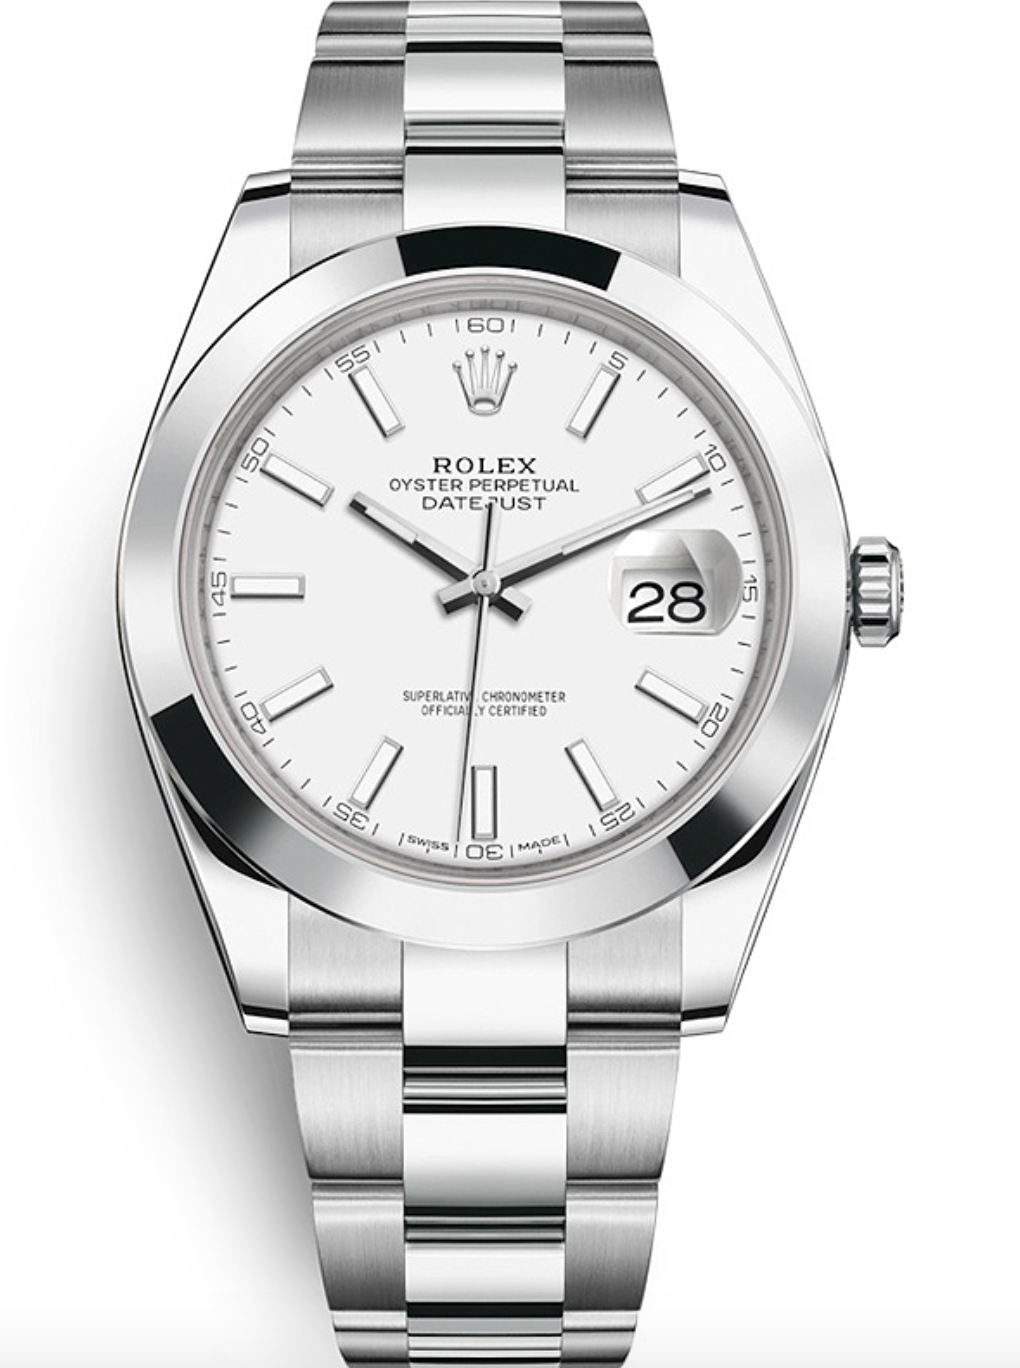 Replica AAAA+ Rolex Datejust 41 Steel White Dial Smooth Bezel Oyster Watch 126300 - IP Empire Replica Watches